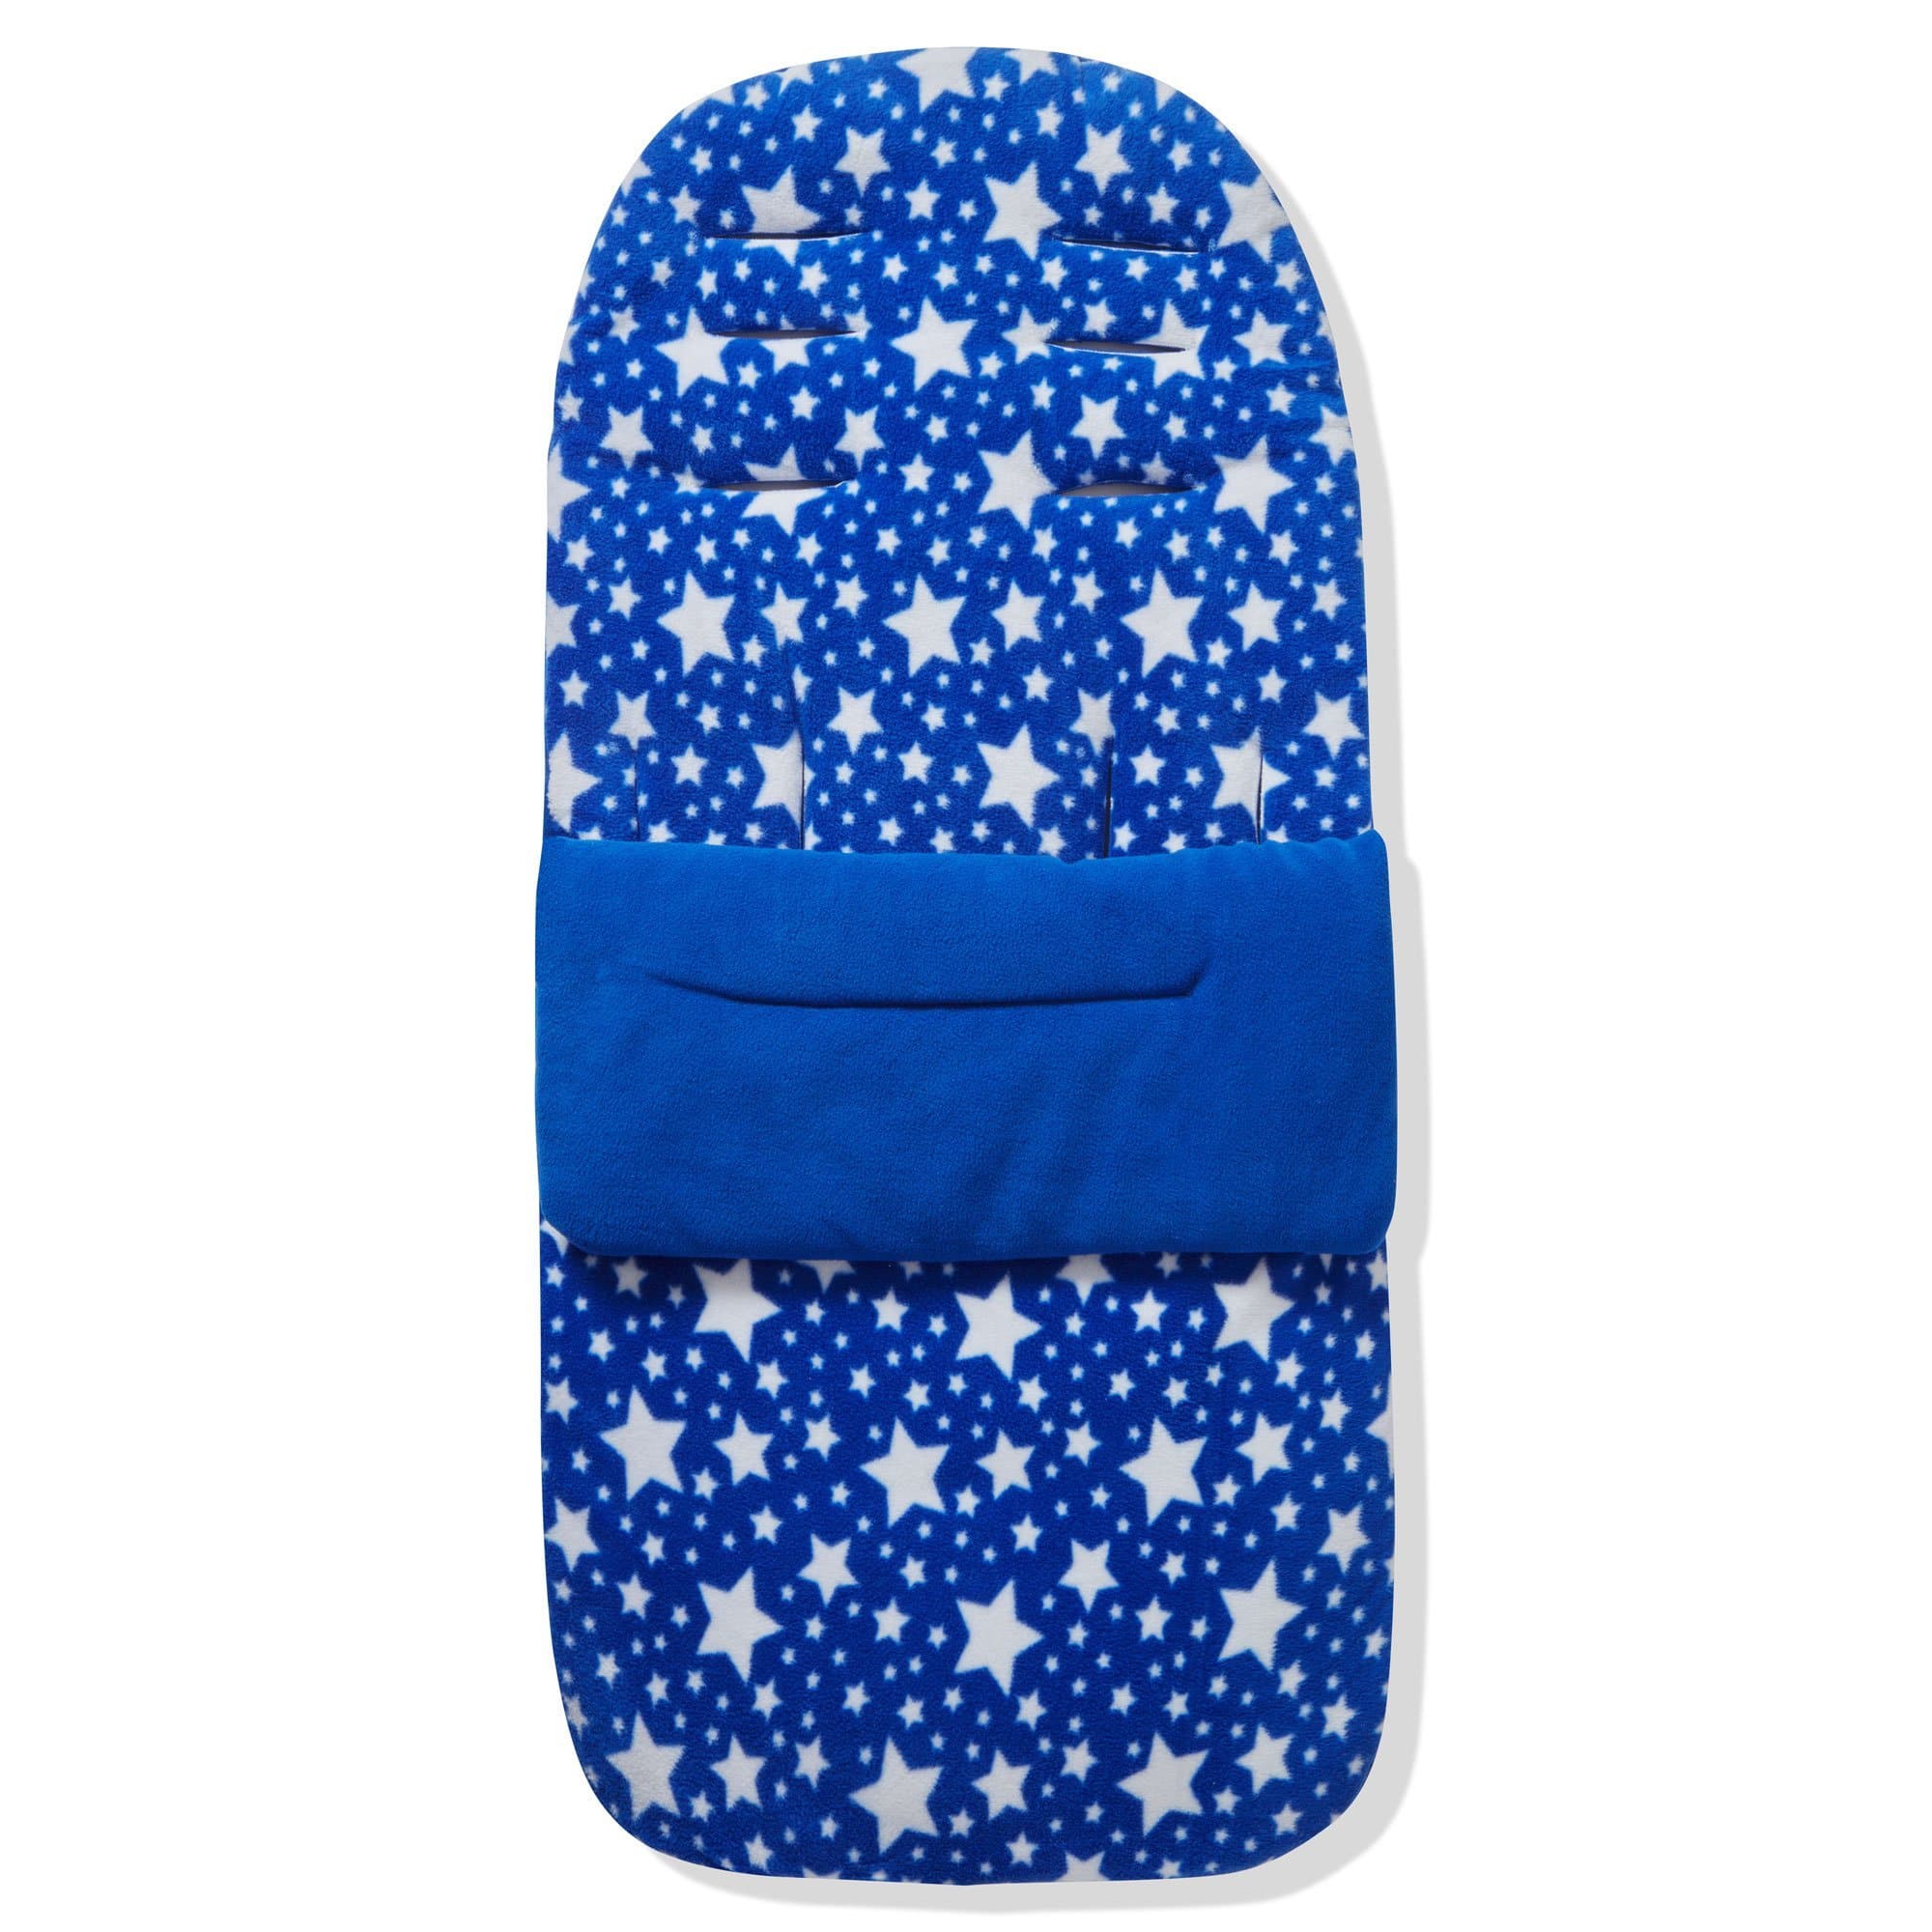 Fleece Footmuff / Cosy Toes Compatible With Combi - For Your Little One